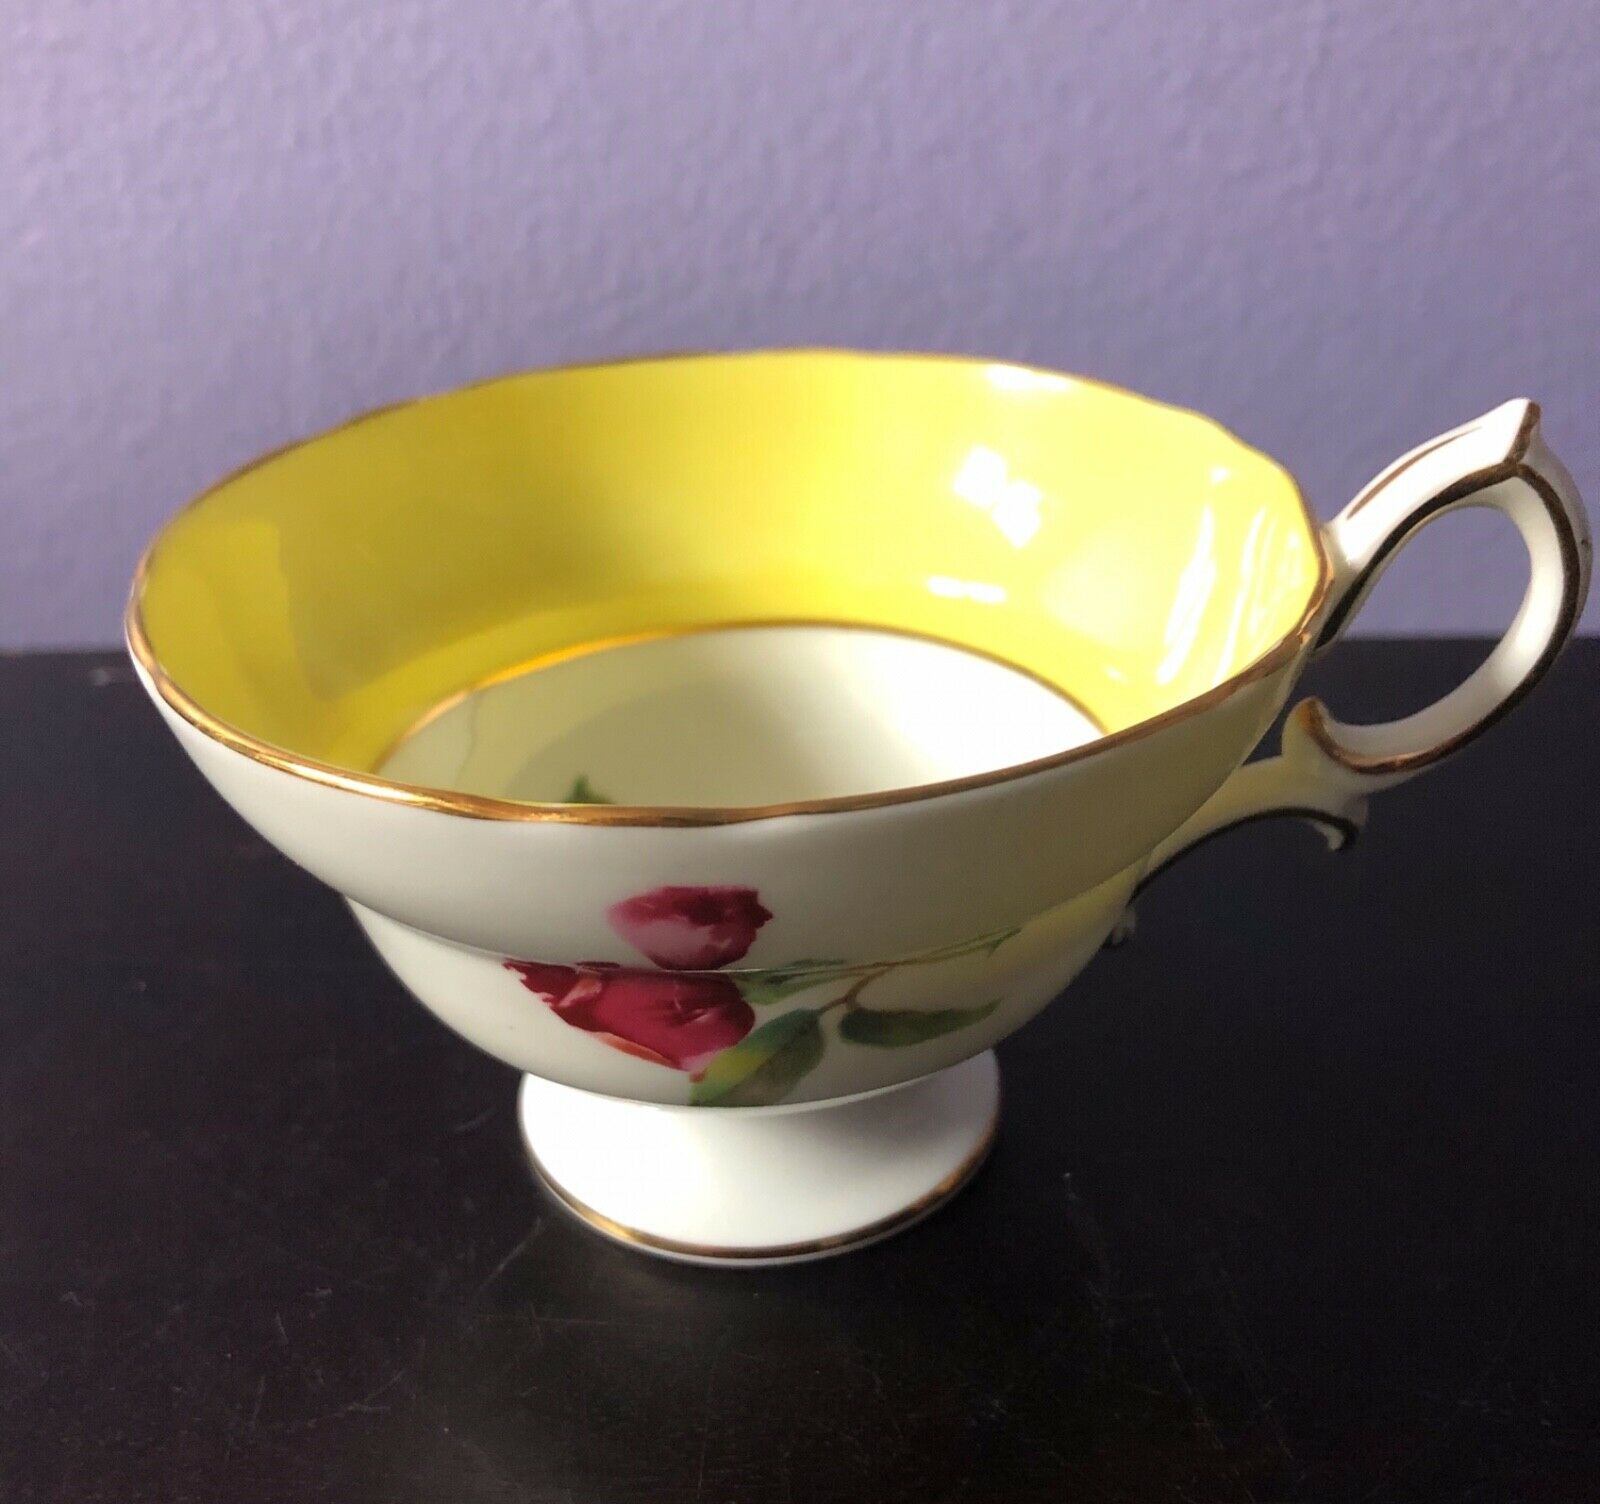 Hammersley Bone China Tea Cup White And Yellow With Roses And Gold Accent Mint!